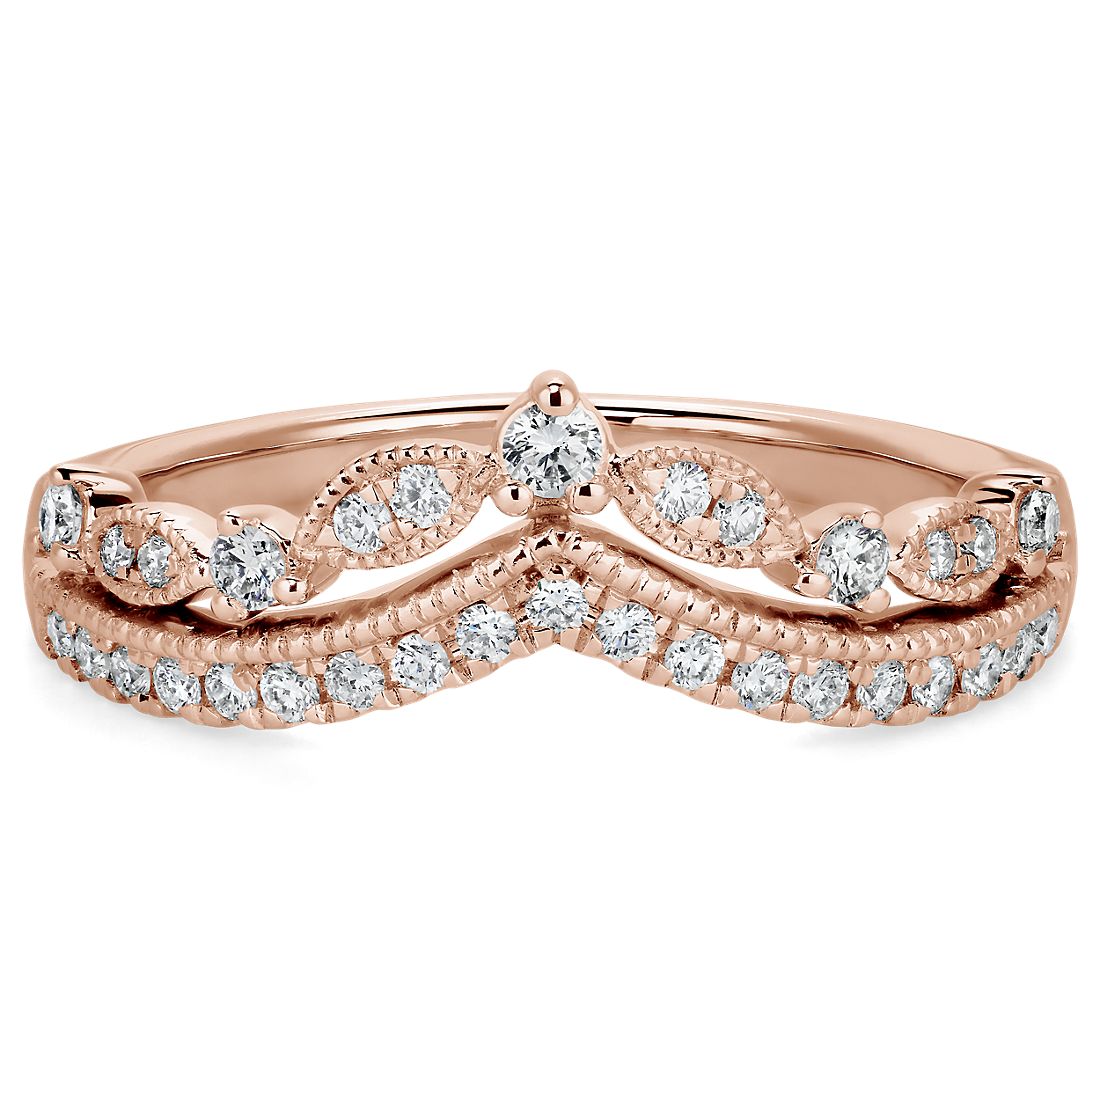 Regal Curved Diamond Ring in 14k Rose Gold (1/4 ct. tw.)